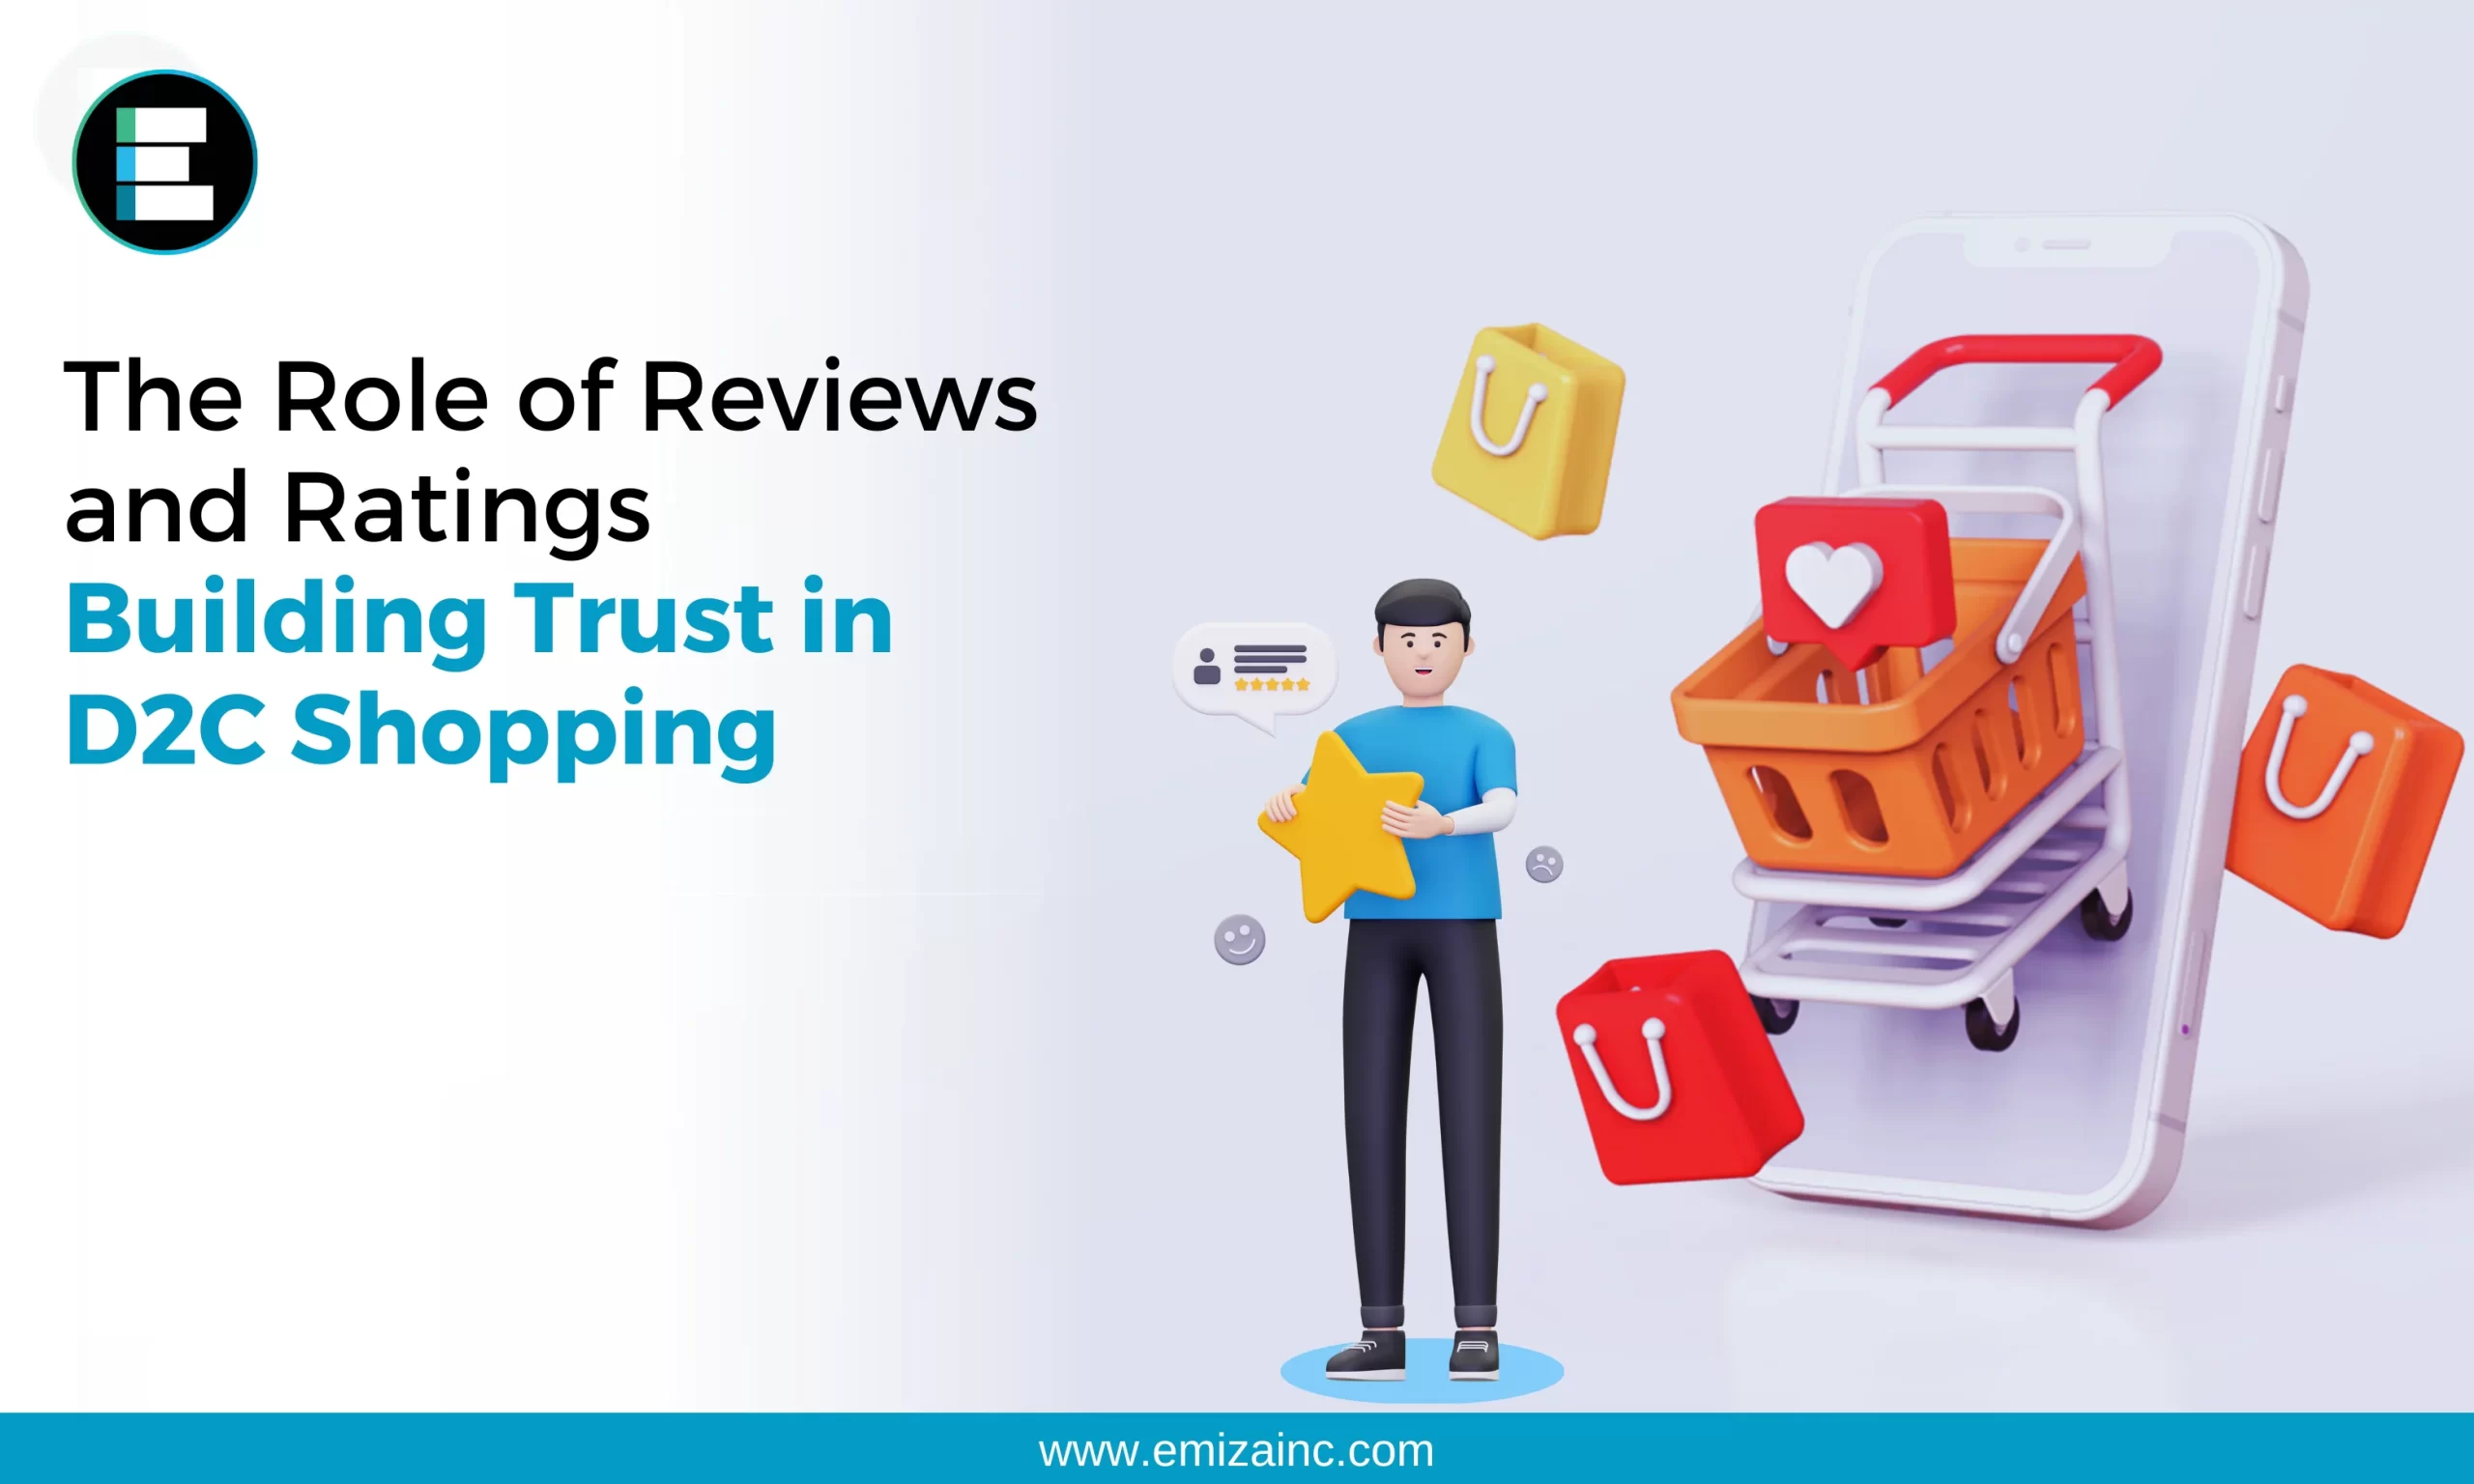 The Role of Reviews and Ratings: Building Trust in D2C Shopping